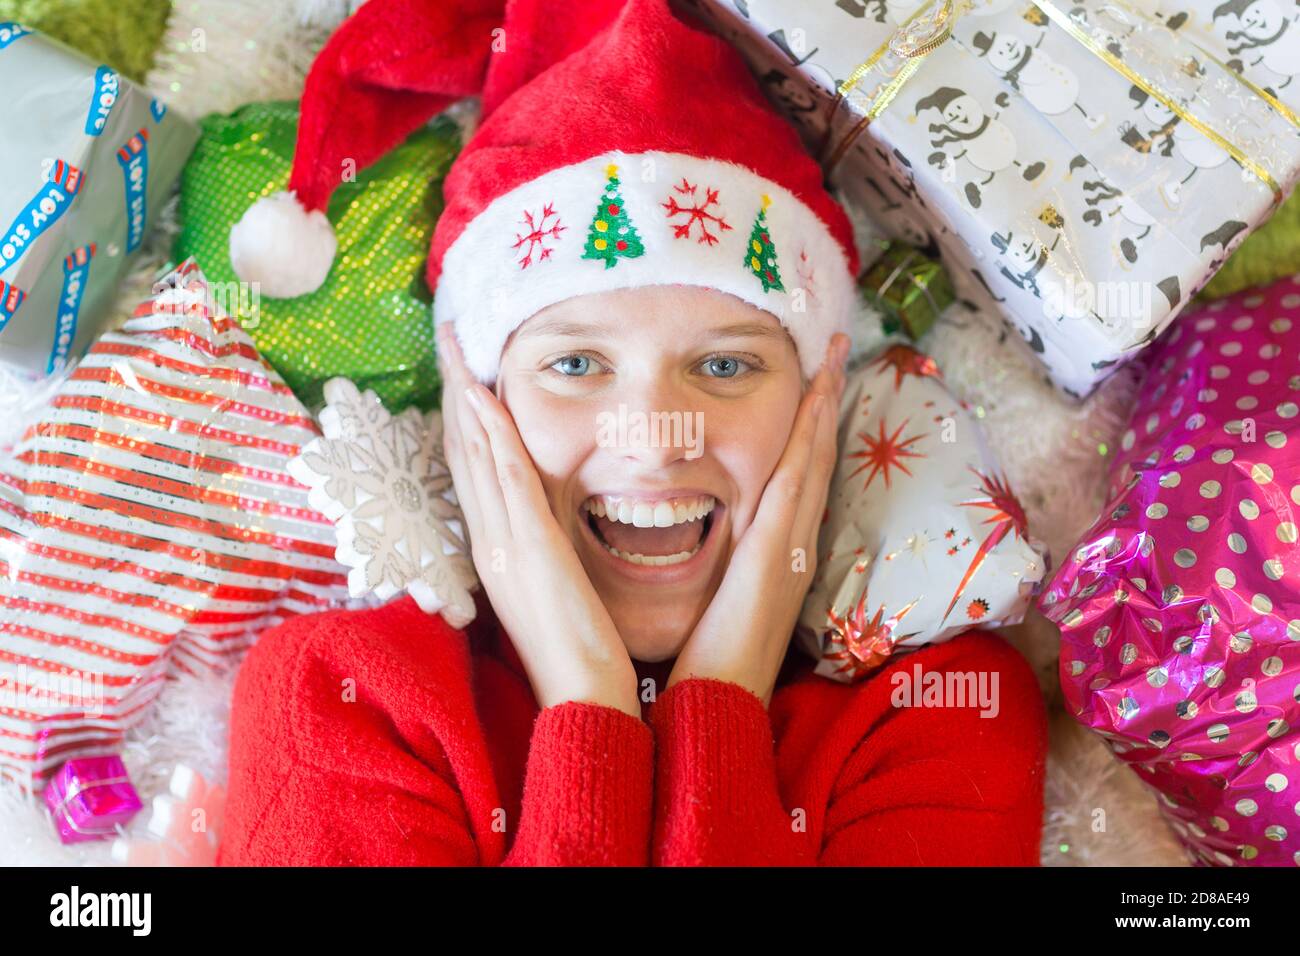 Christmas time! Joyful excited young woman lying surrounded by many gifts wearing a red Santa hat. Stock Photo